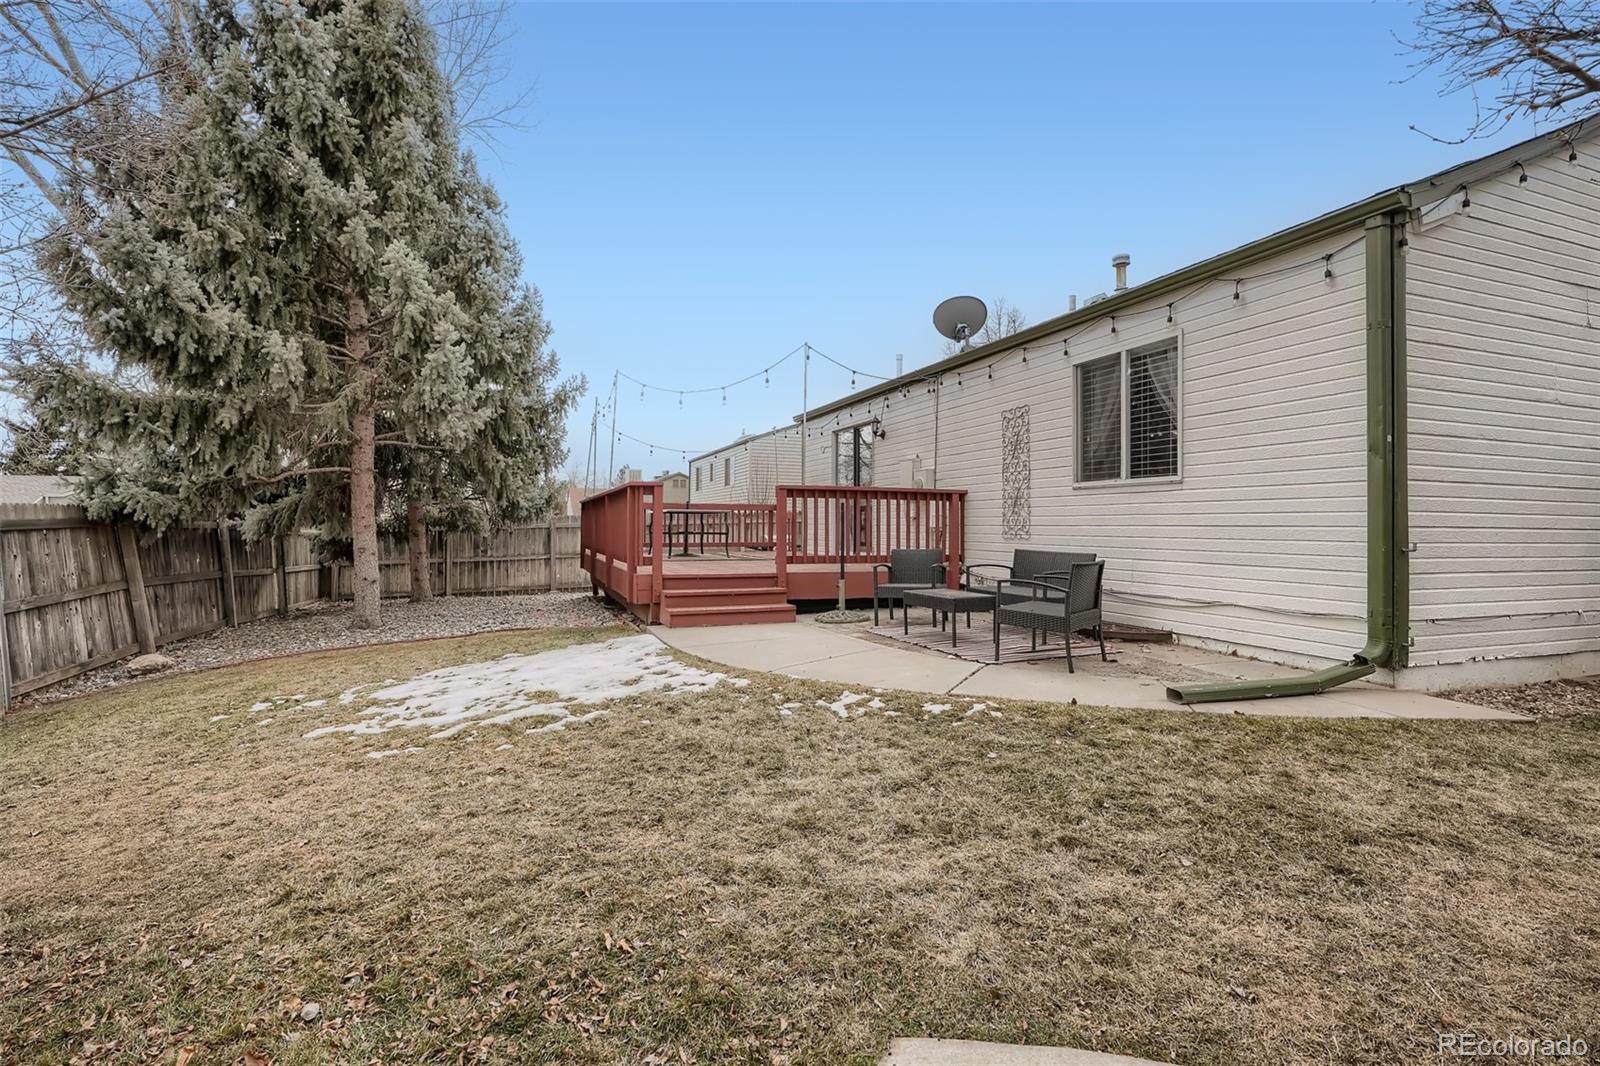 11514 Ingalls, Westminster, CO